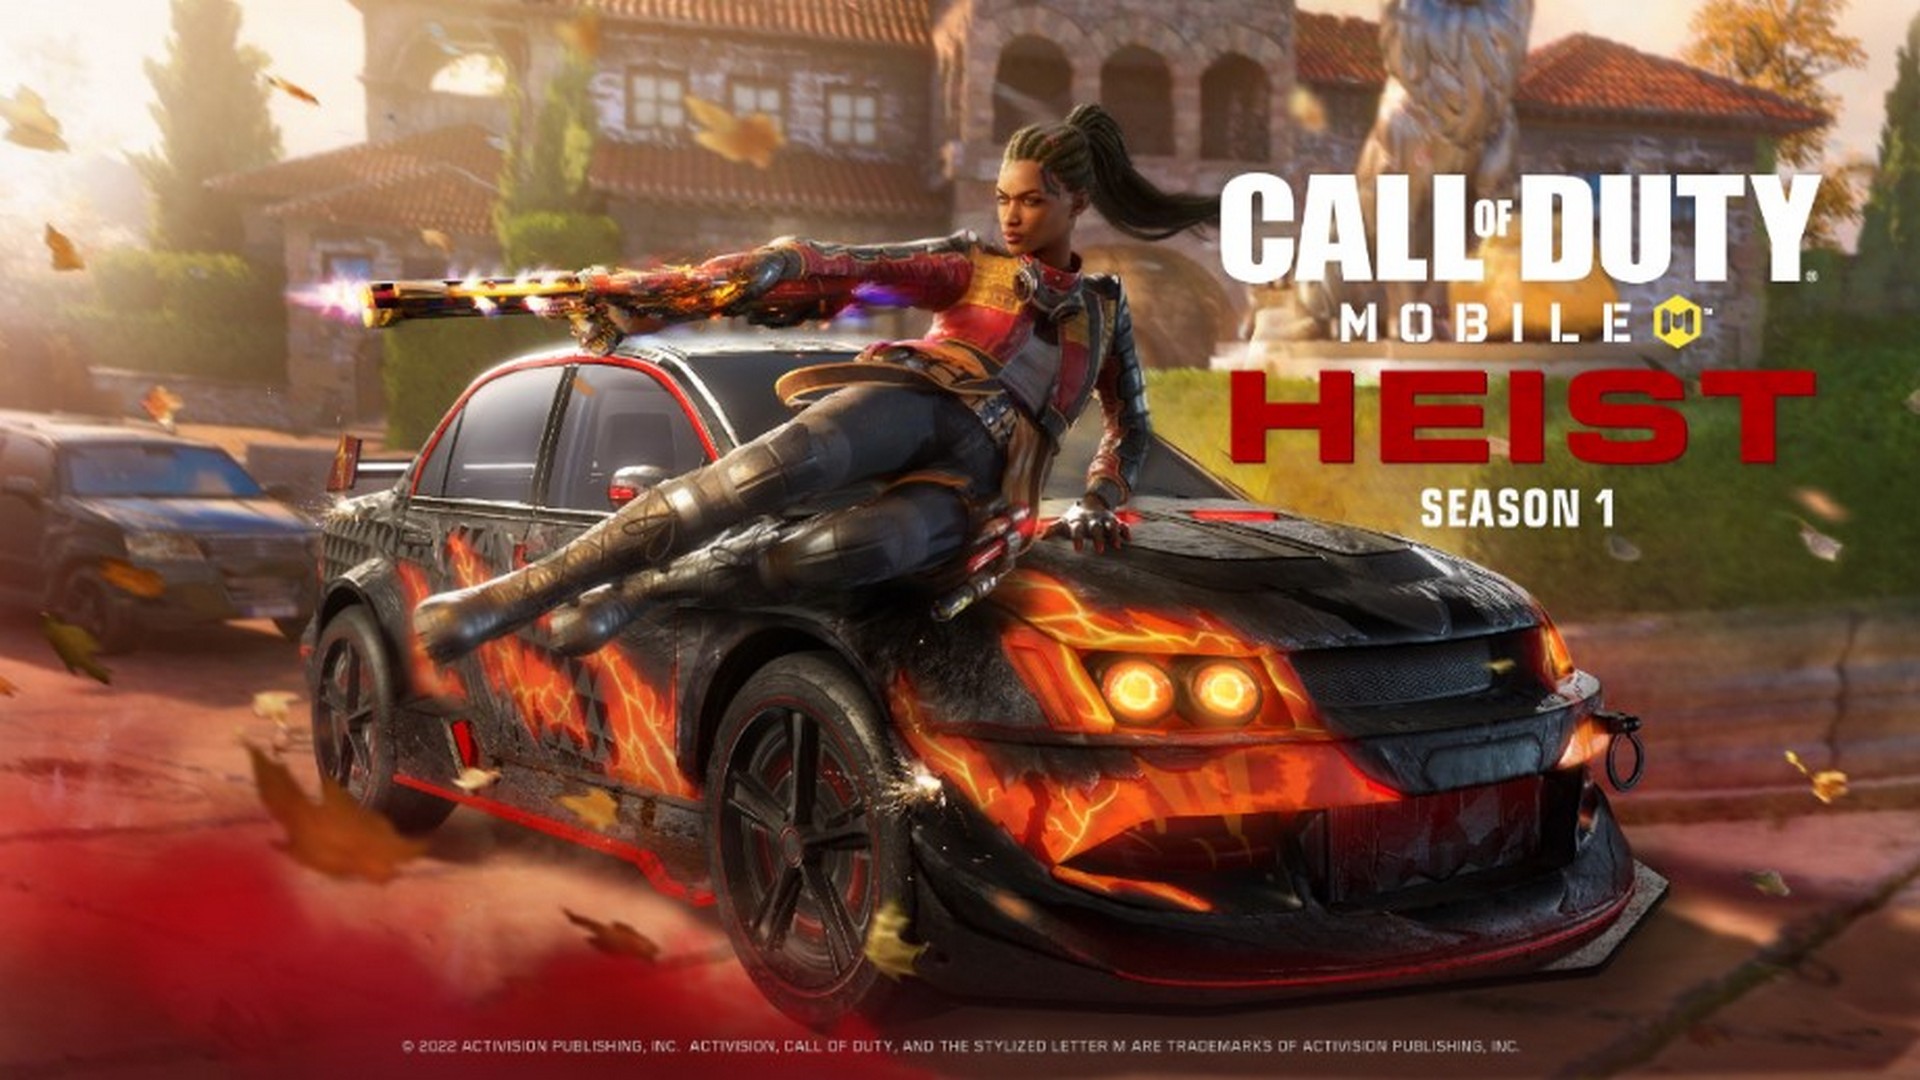 Celebrate The New Year With Call of Duty: Mobile Season 1: Heist